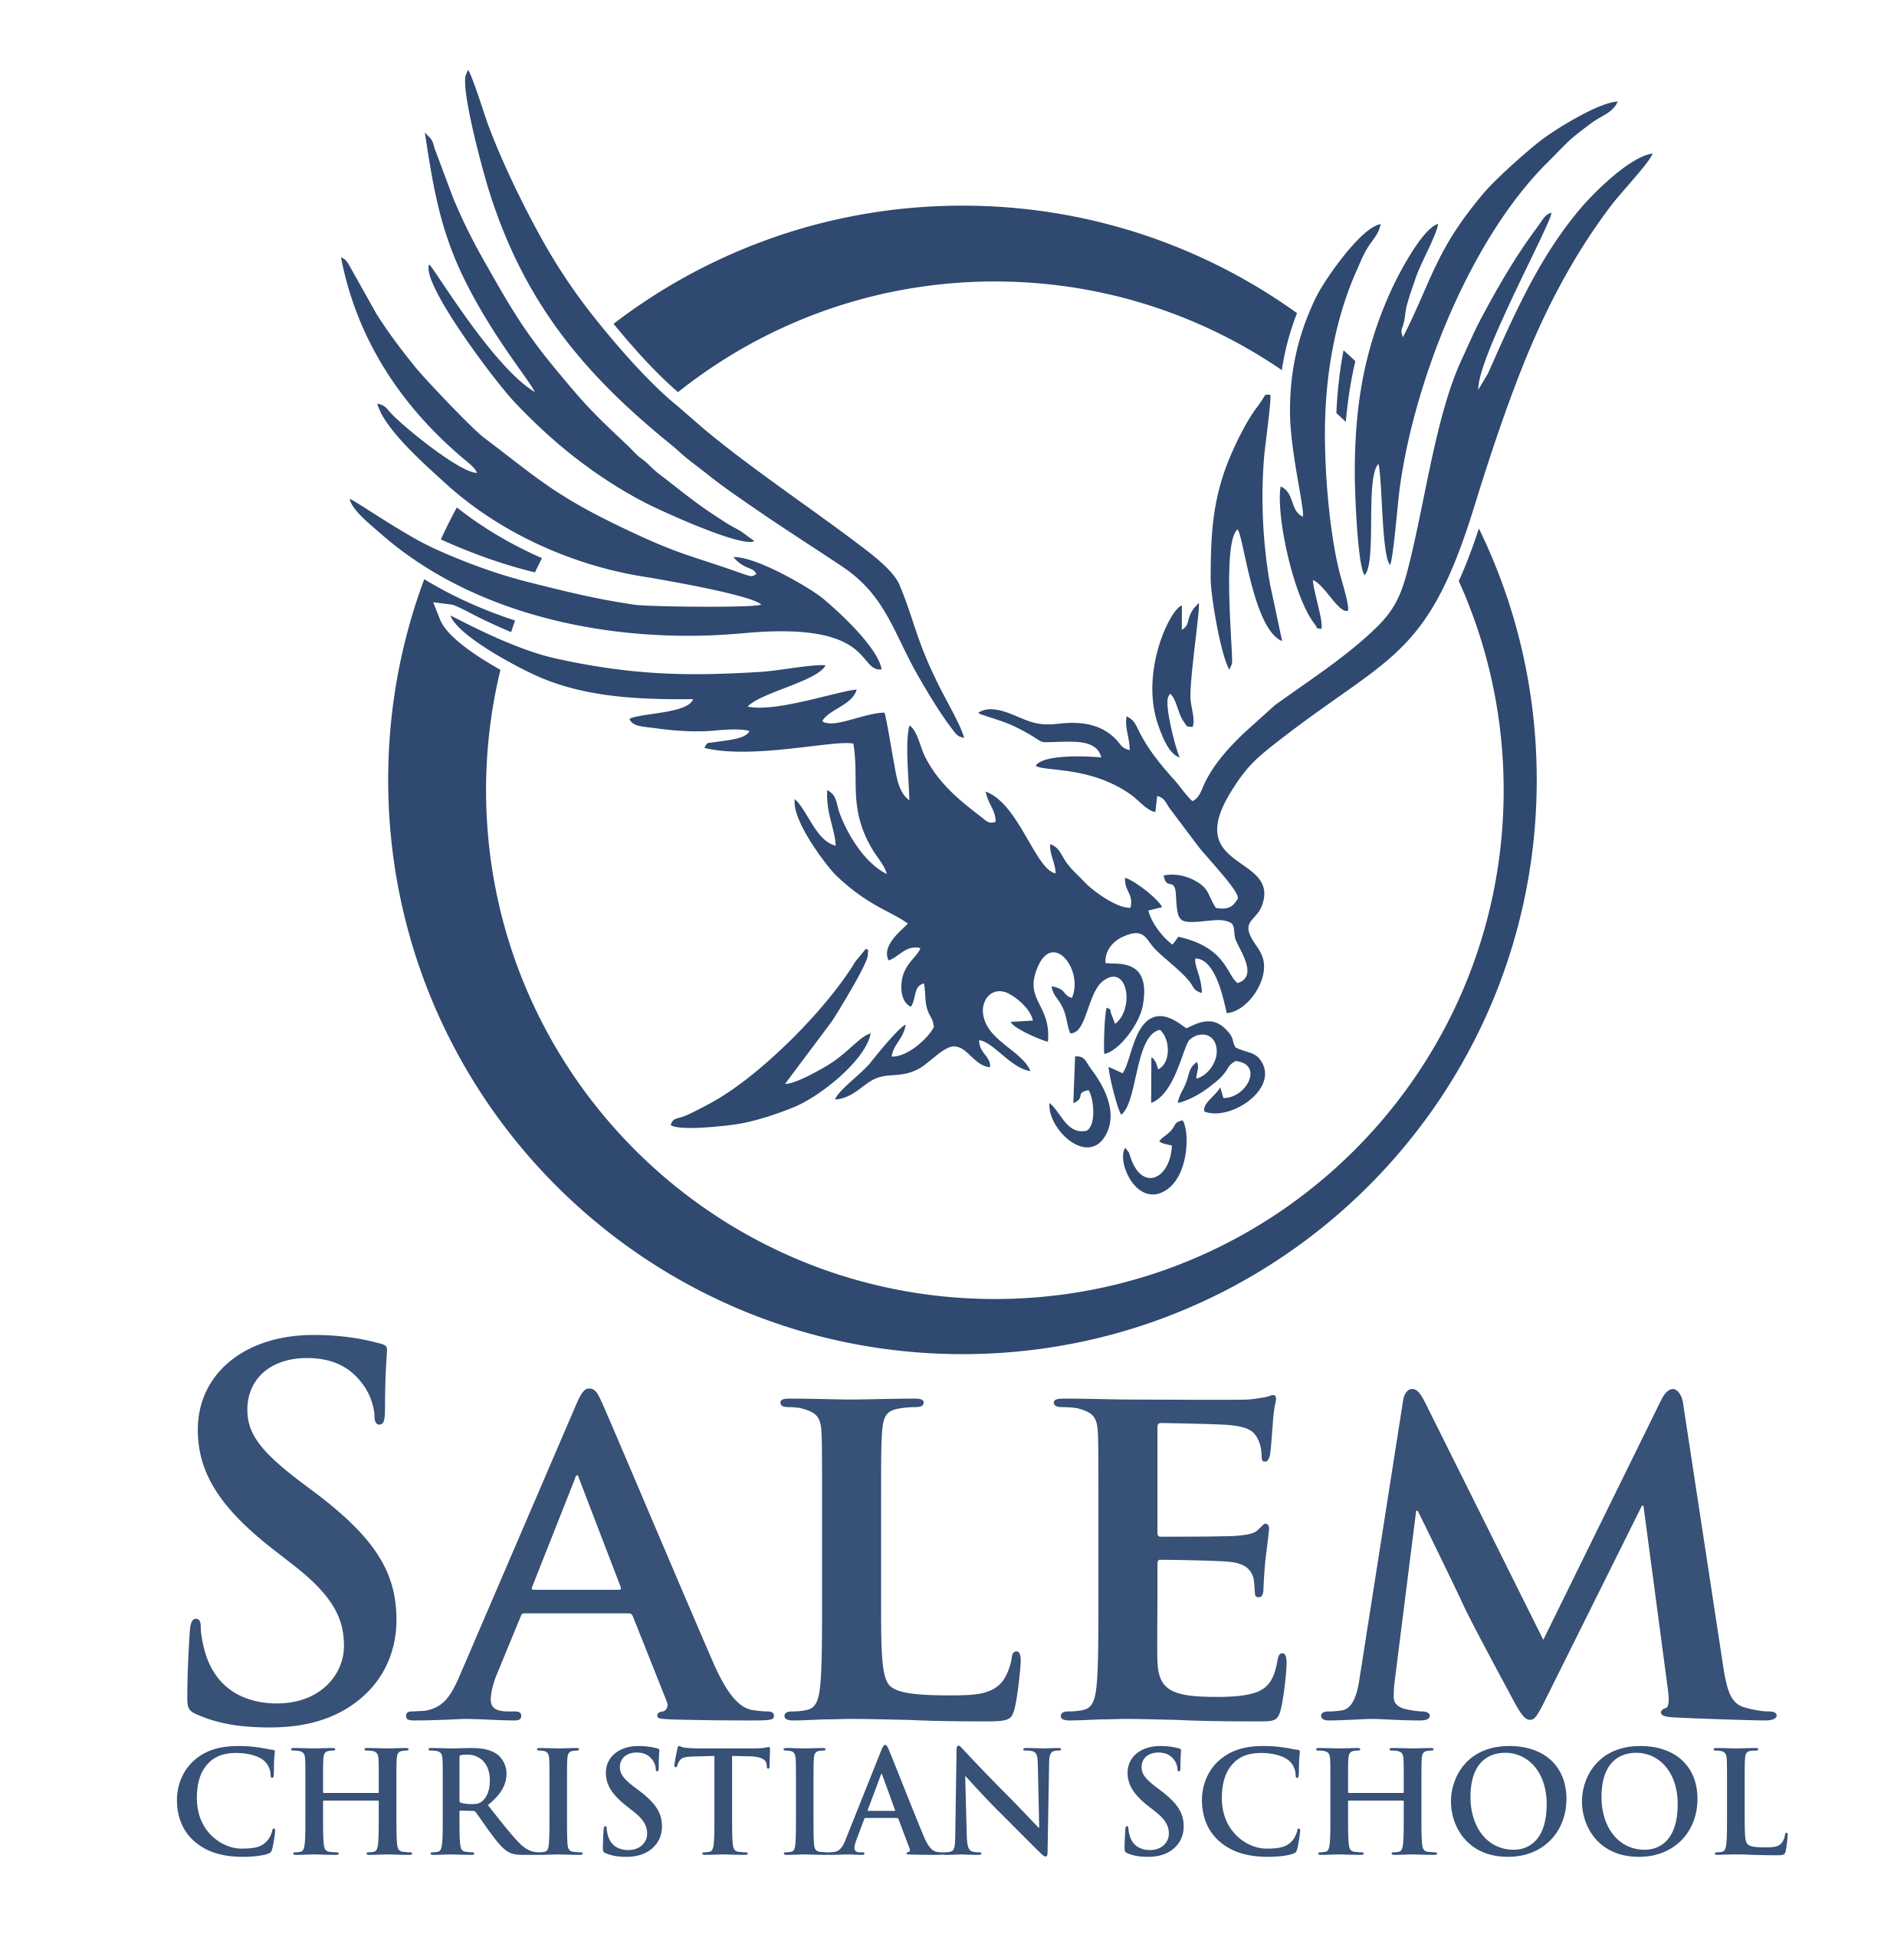 Eagle School Logo - As the eagle is an iconic symbol in America many schools use